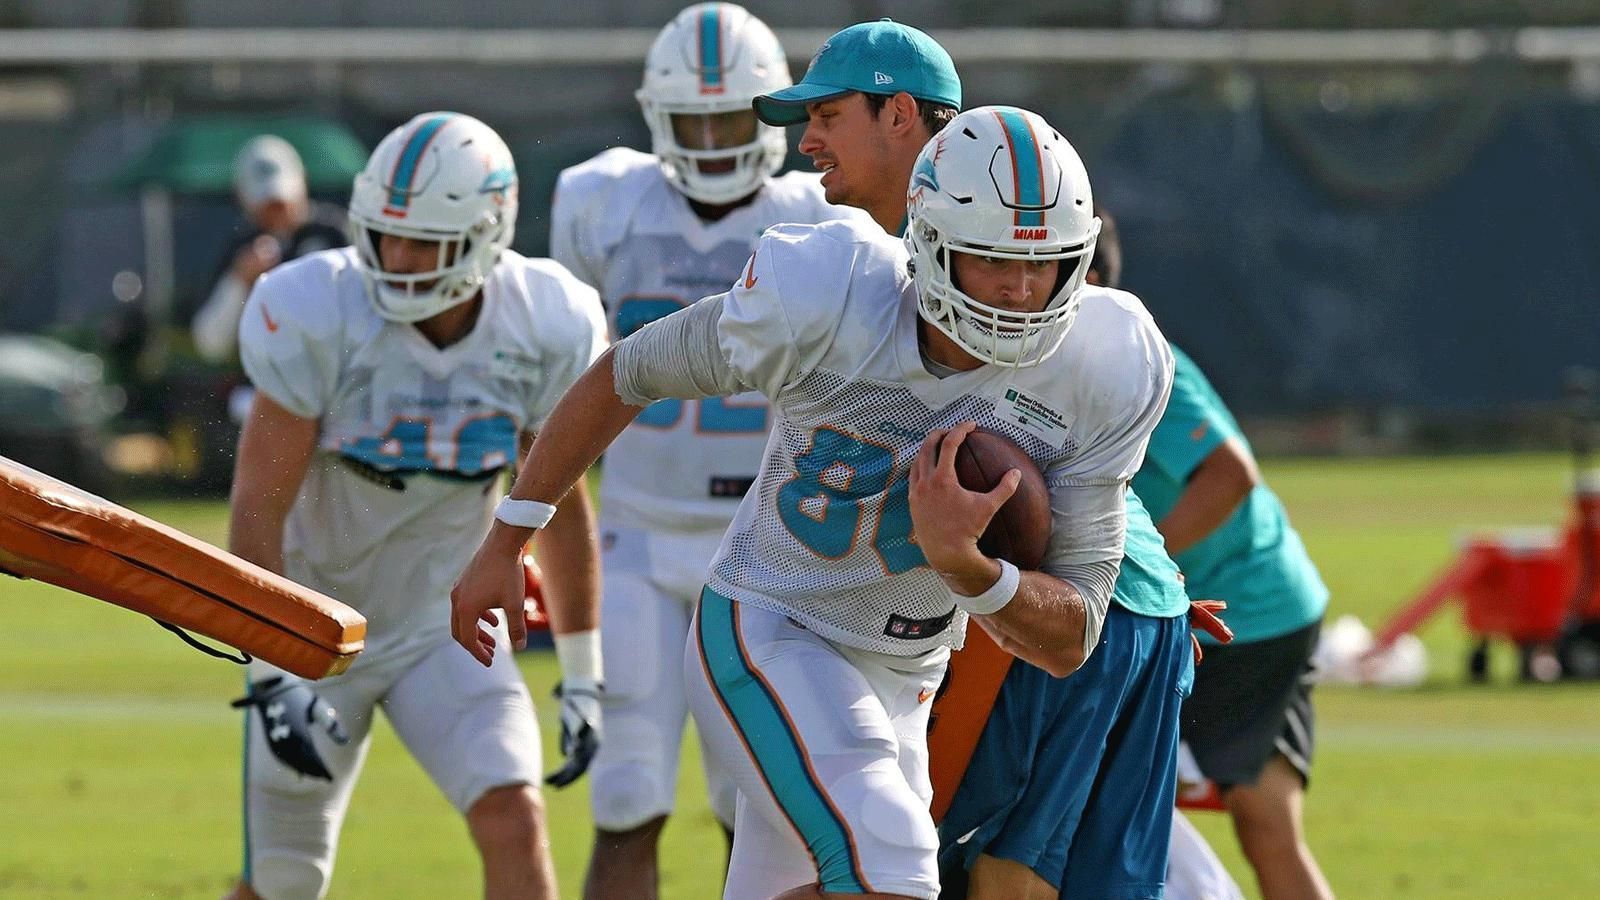 
                <strong>Miami Dolphins</strong><br>
                2018: 26.5 (26)     2017: 26.6 (29)     2016: 26.2 (20)   2015: 25.6 (4)     2014: 25.9 (15)     2013: 25.7 (9)
              